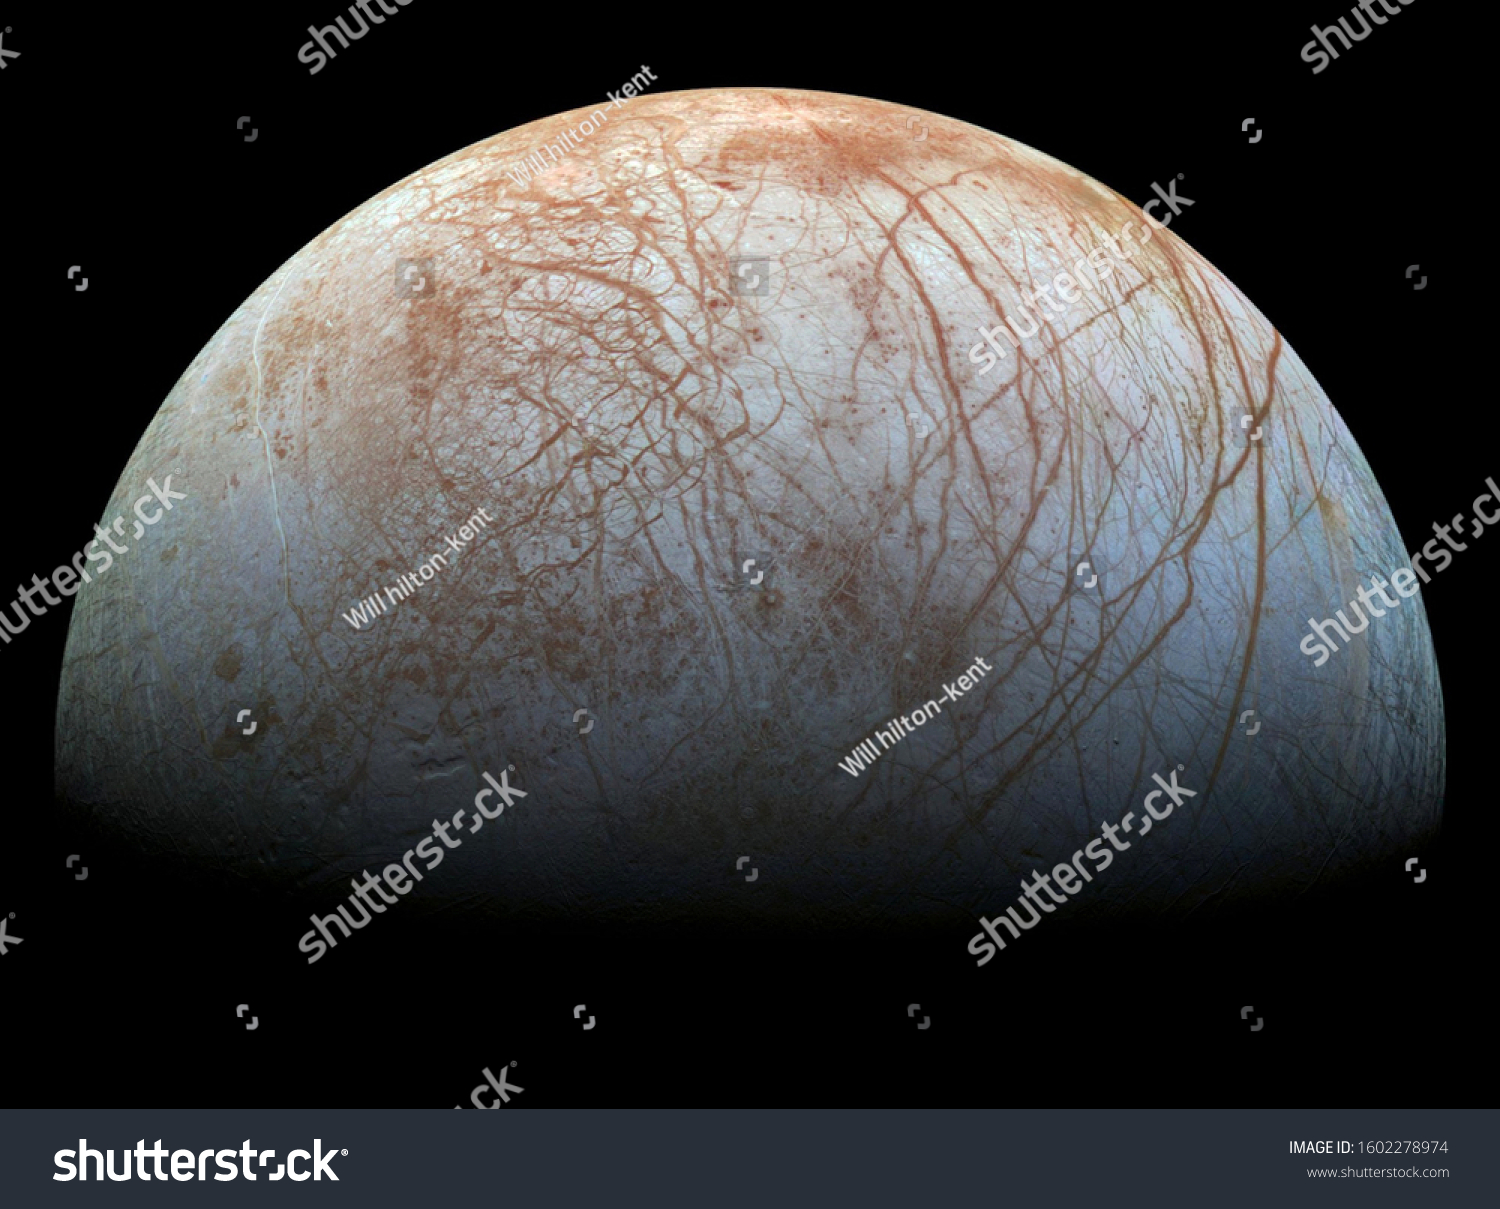 Europa One Jupiters Moons Surface Ice Stock Photo 1602278974 Shutterstock